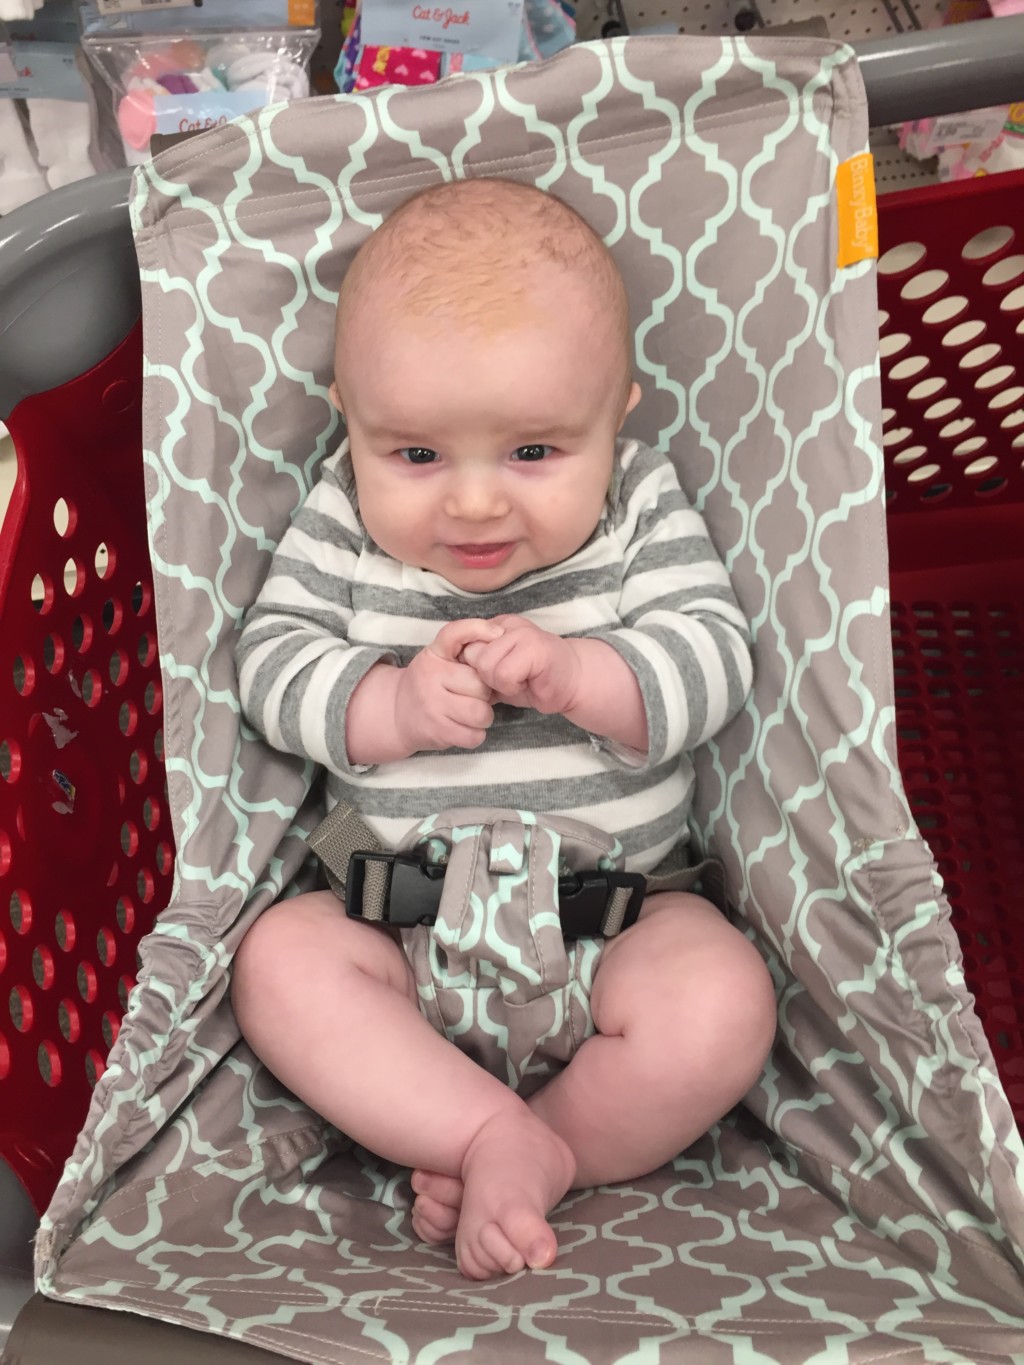 The Solution to Shopping with Babies 